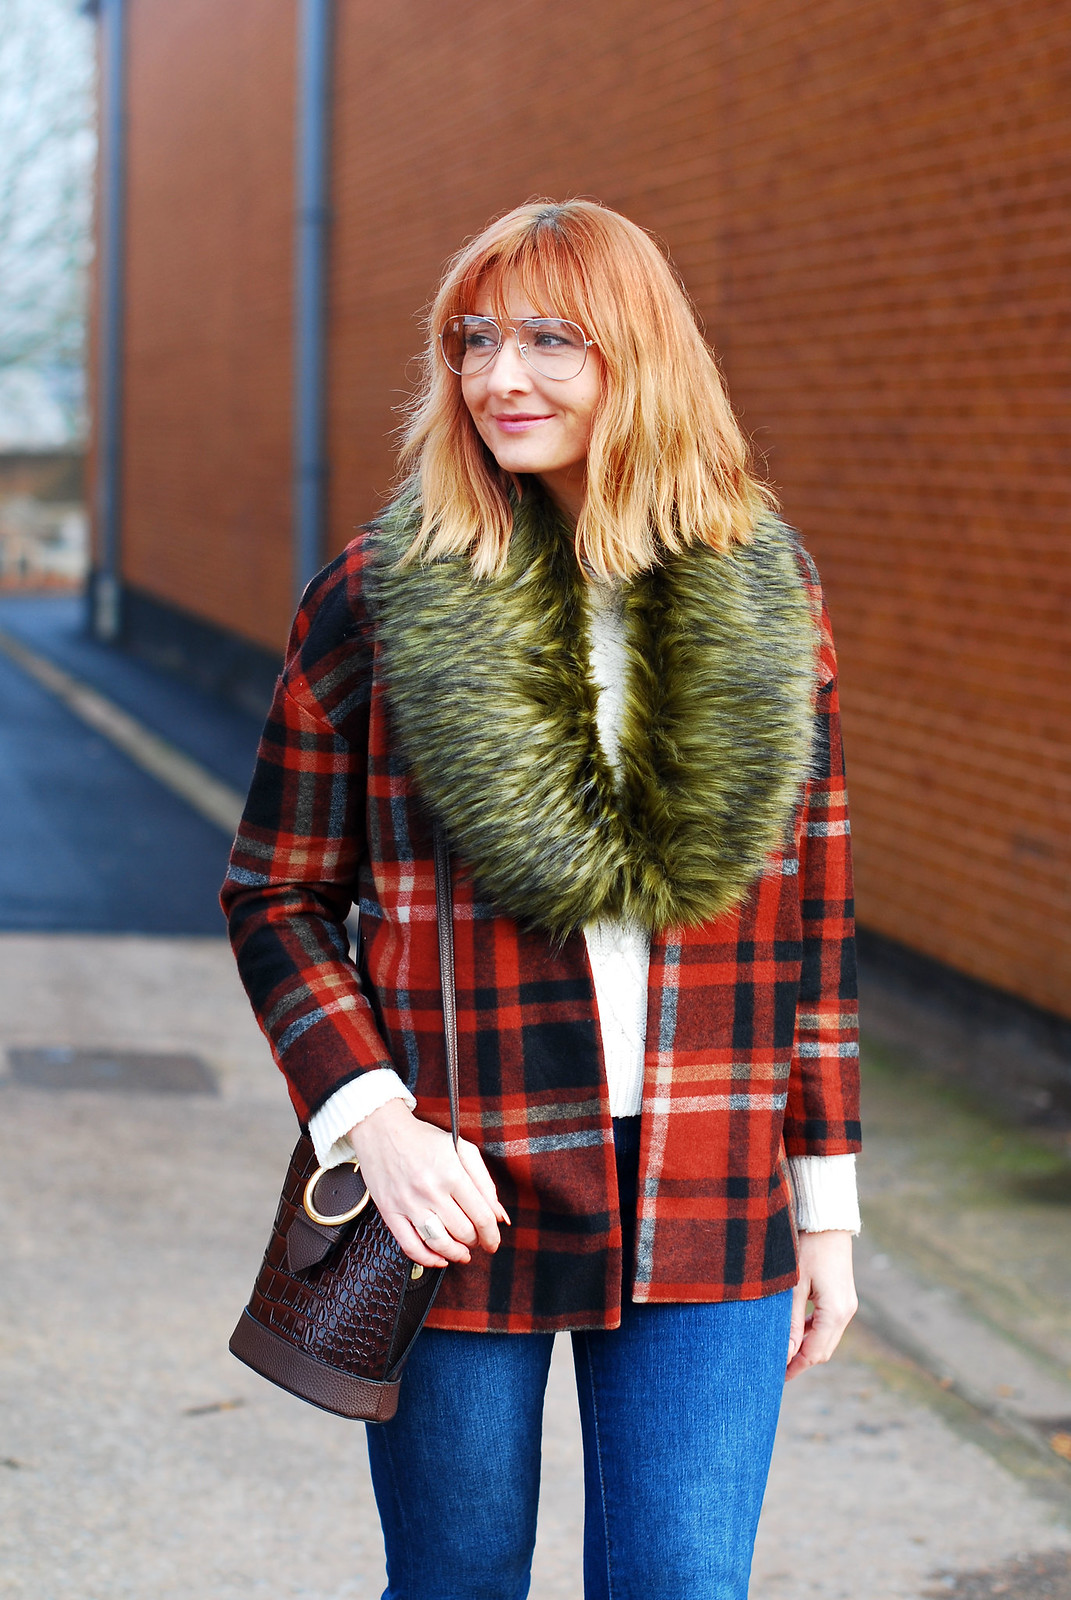 Autumnal casual outfit of faux fur collar red tartan jacket denim flares snakeskin boots | Not Dressed As Lamb, over 40 style